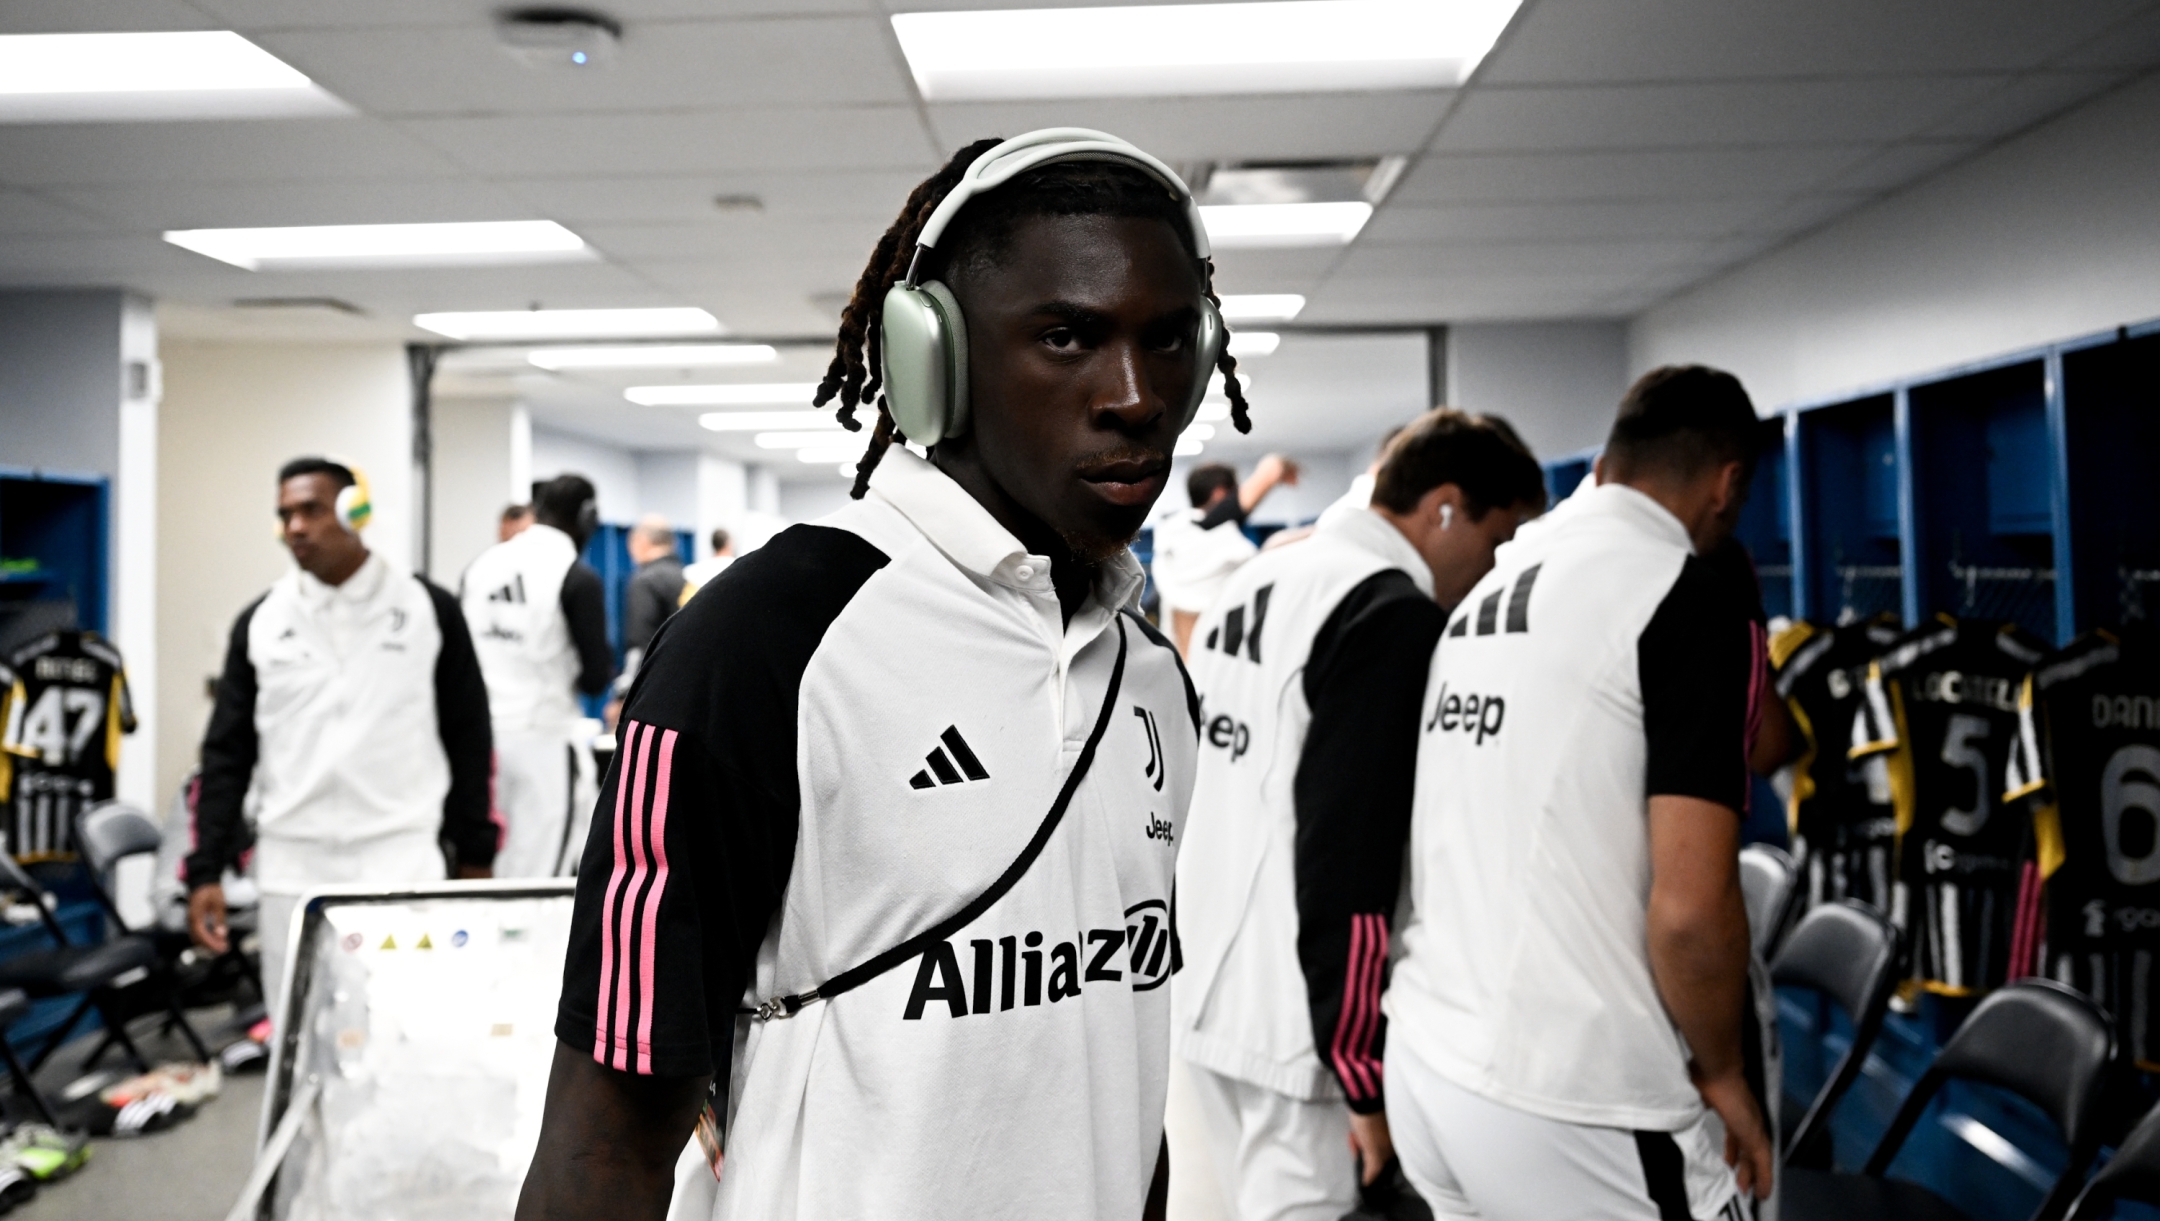 CARSON, CALIFORNIA - JULY 27: Moise Kean of Juventus arrives to the locker room before the pre-season friendly match between Juventus and AC Milan at Dignity Health Sports Park on July 27, 2023 in Carson, California. (Photo by Daniele Badolato - Juventus FC/Juventus FC via Getty Images)